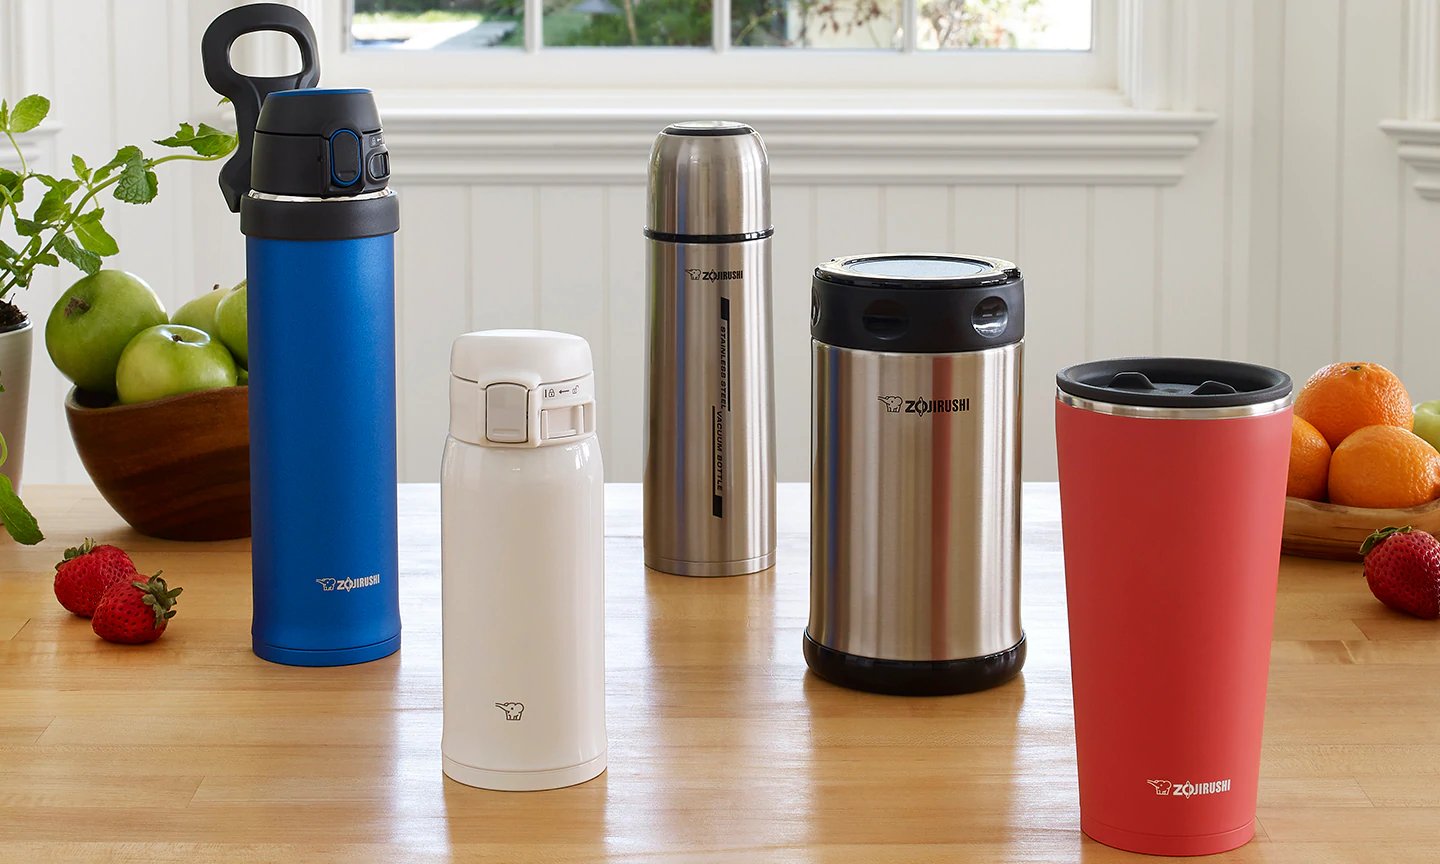 The Zojirushi Stainless Steel Mug Keeps My Drinks Hot for Hours - Eater